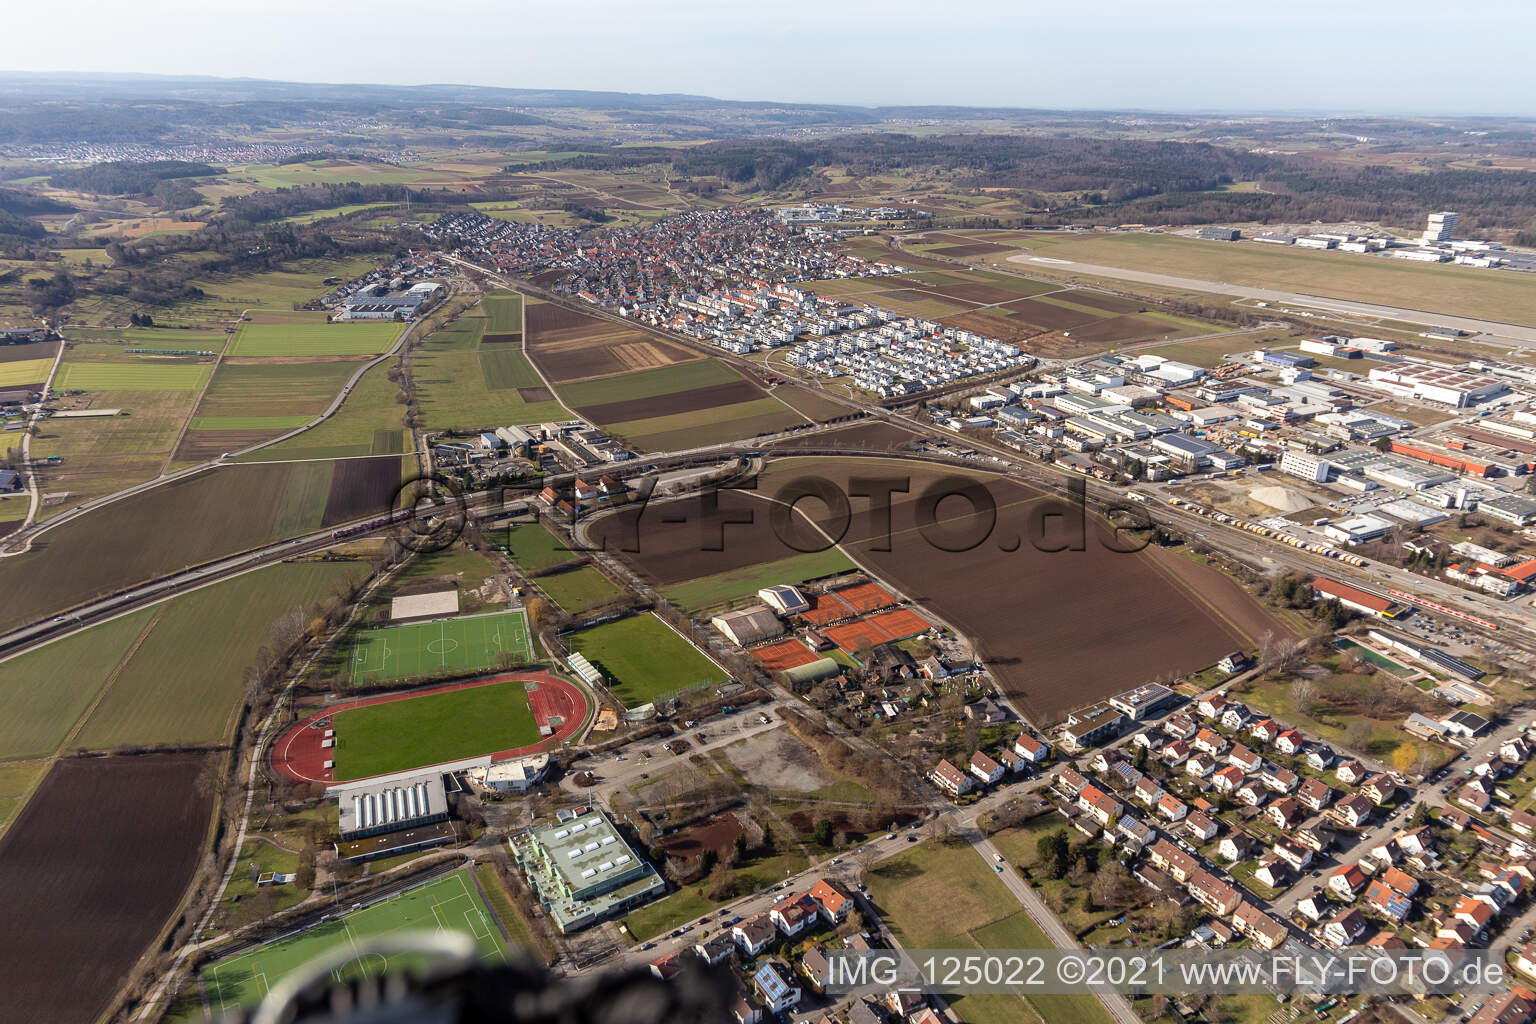 Renningen in the state Baden-Wuerttemberg, Germany from above